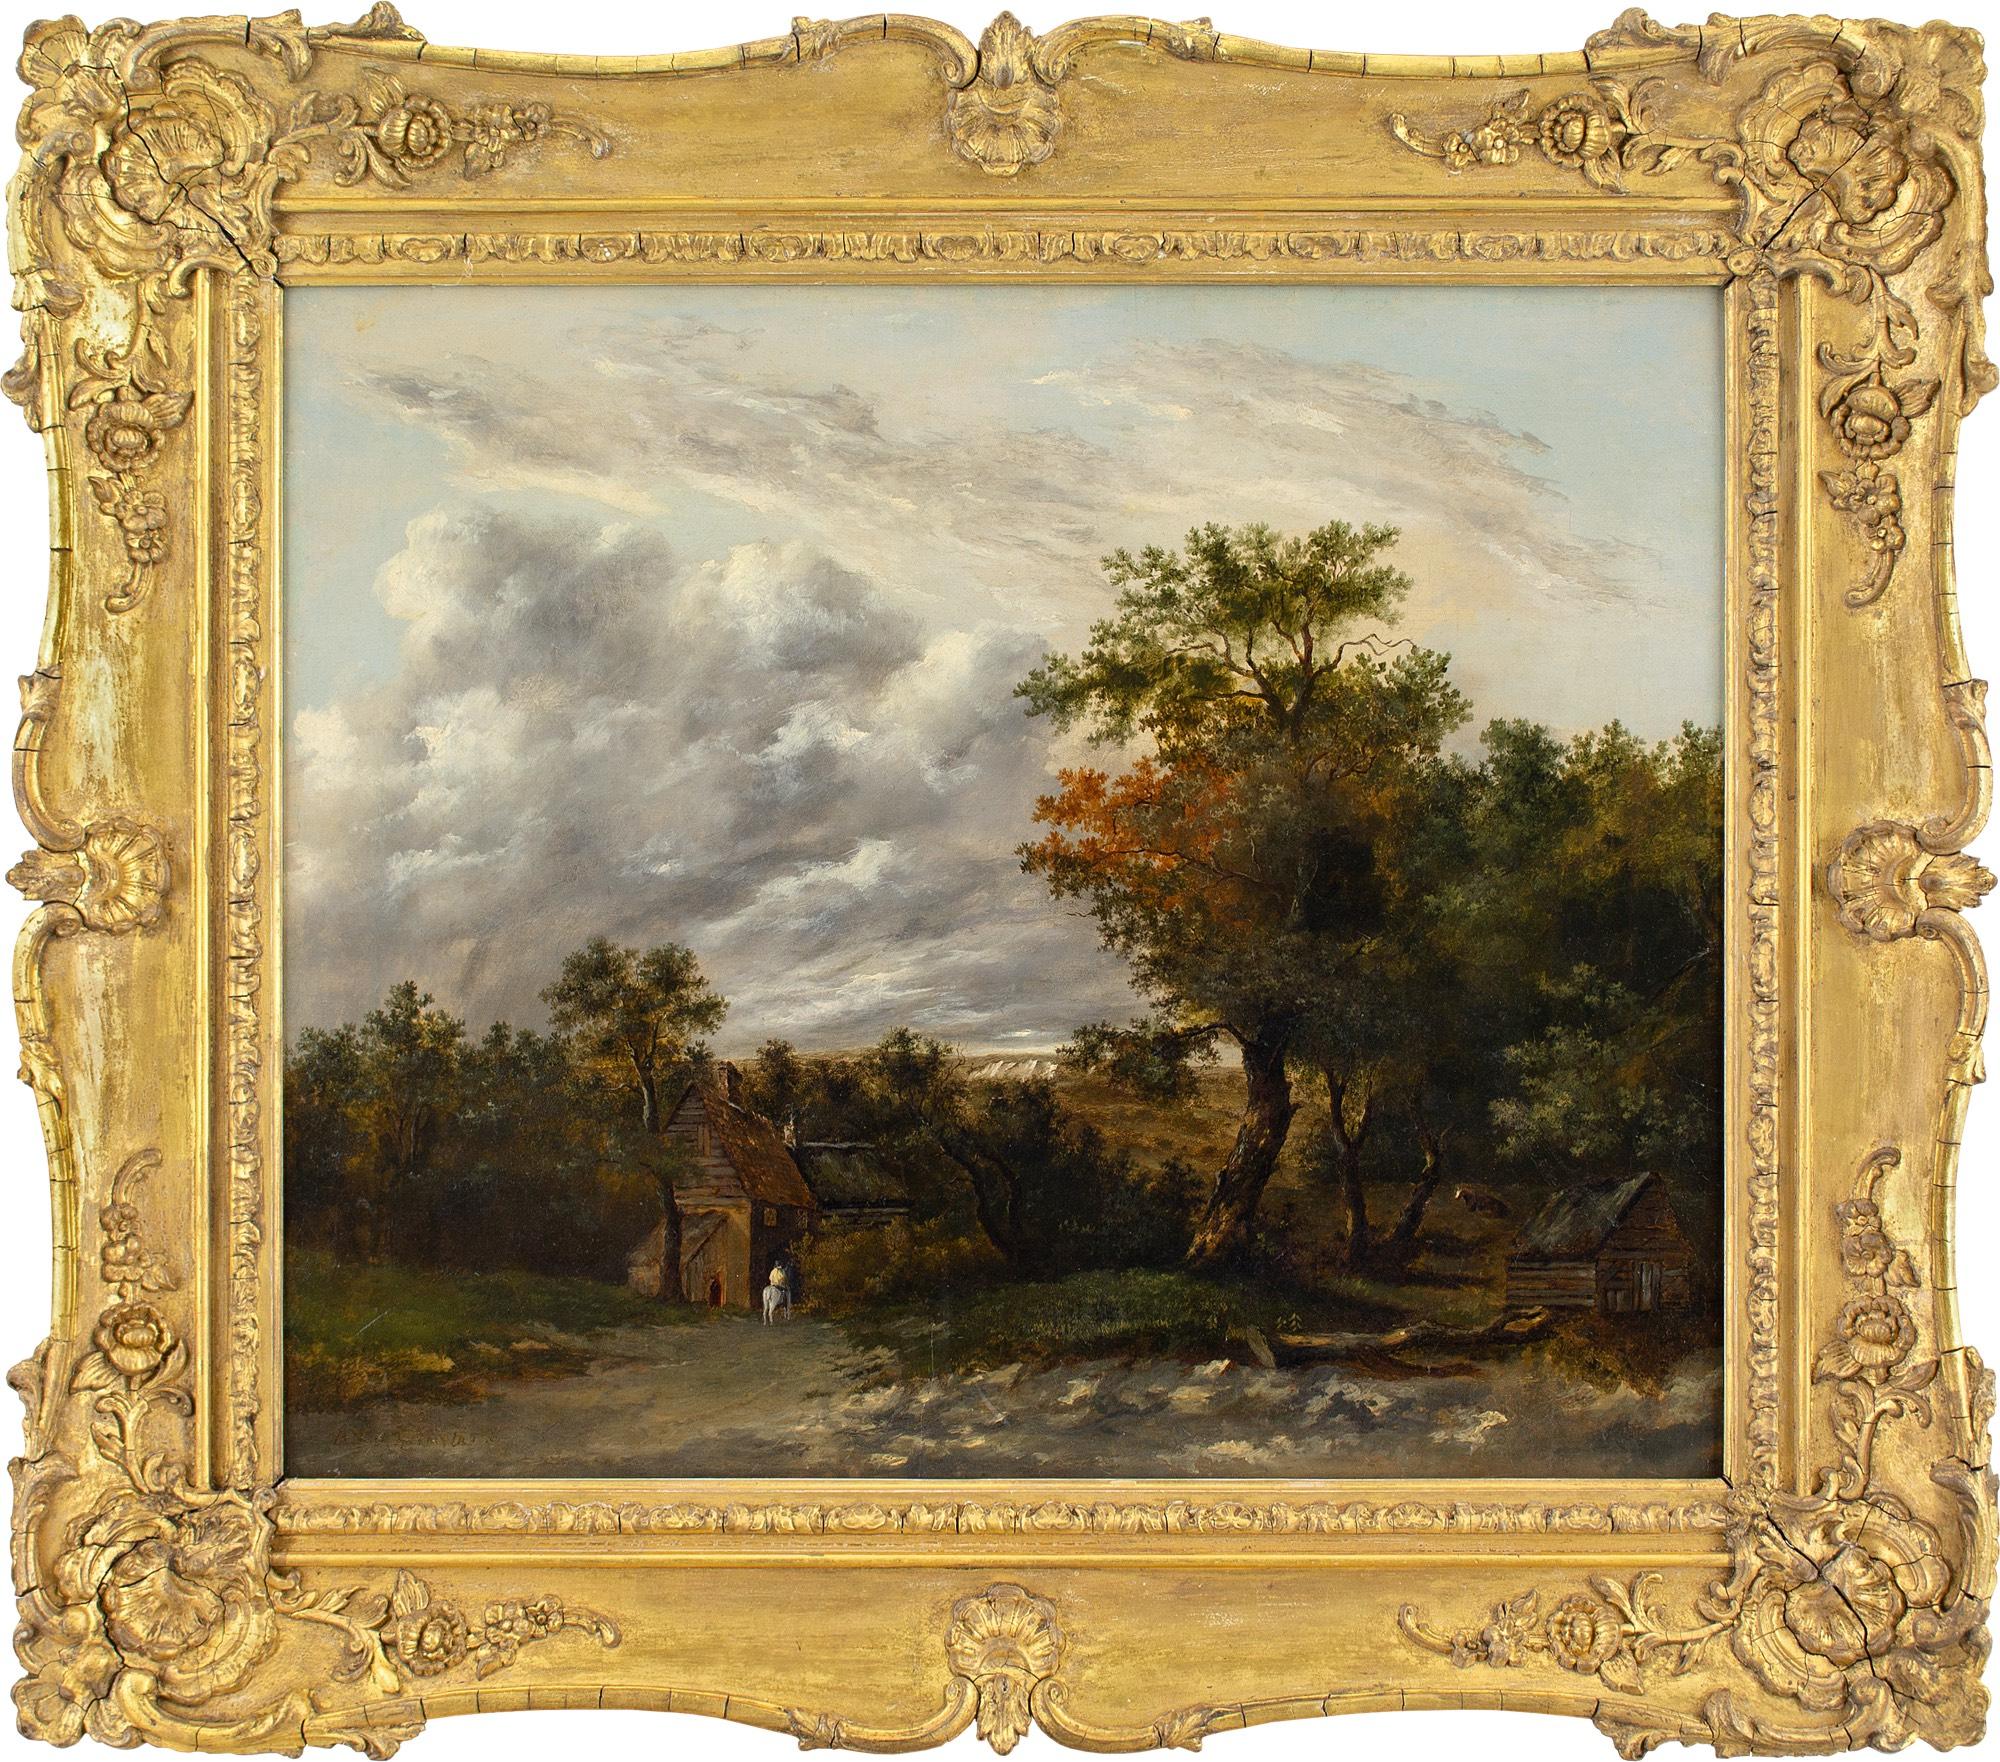 This early 19th-century oil painting by Scottish artist Patrick Nasmyth (1787-1831) depicts a landscape with cottages, trees and horseback rider.

Patrick Nasmyth is one of the unsung heroes of early British landscape painting. A contemporary of